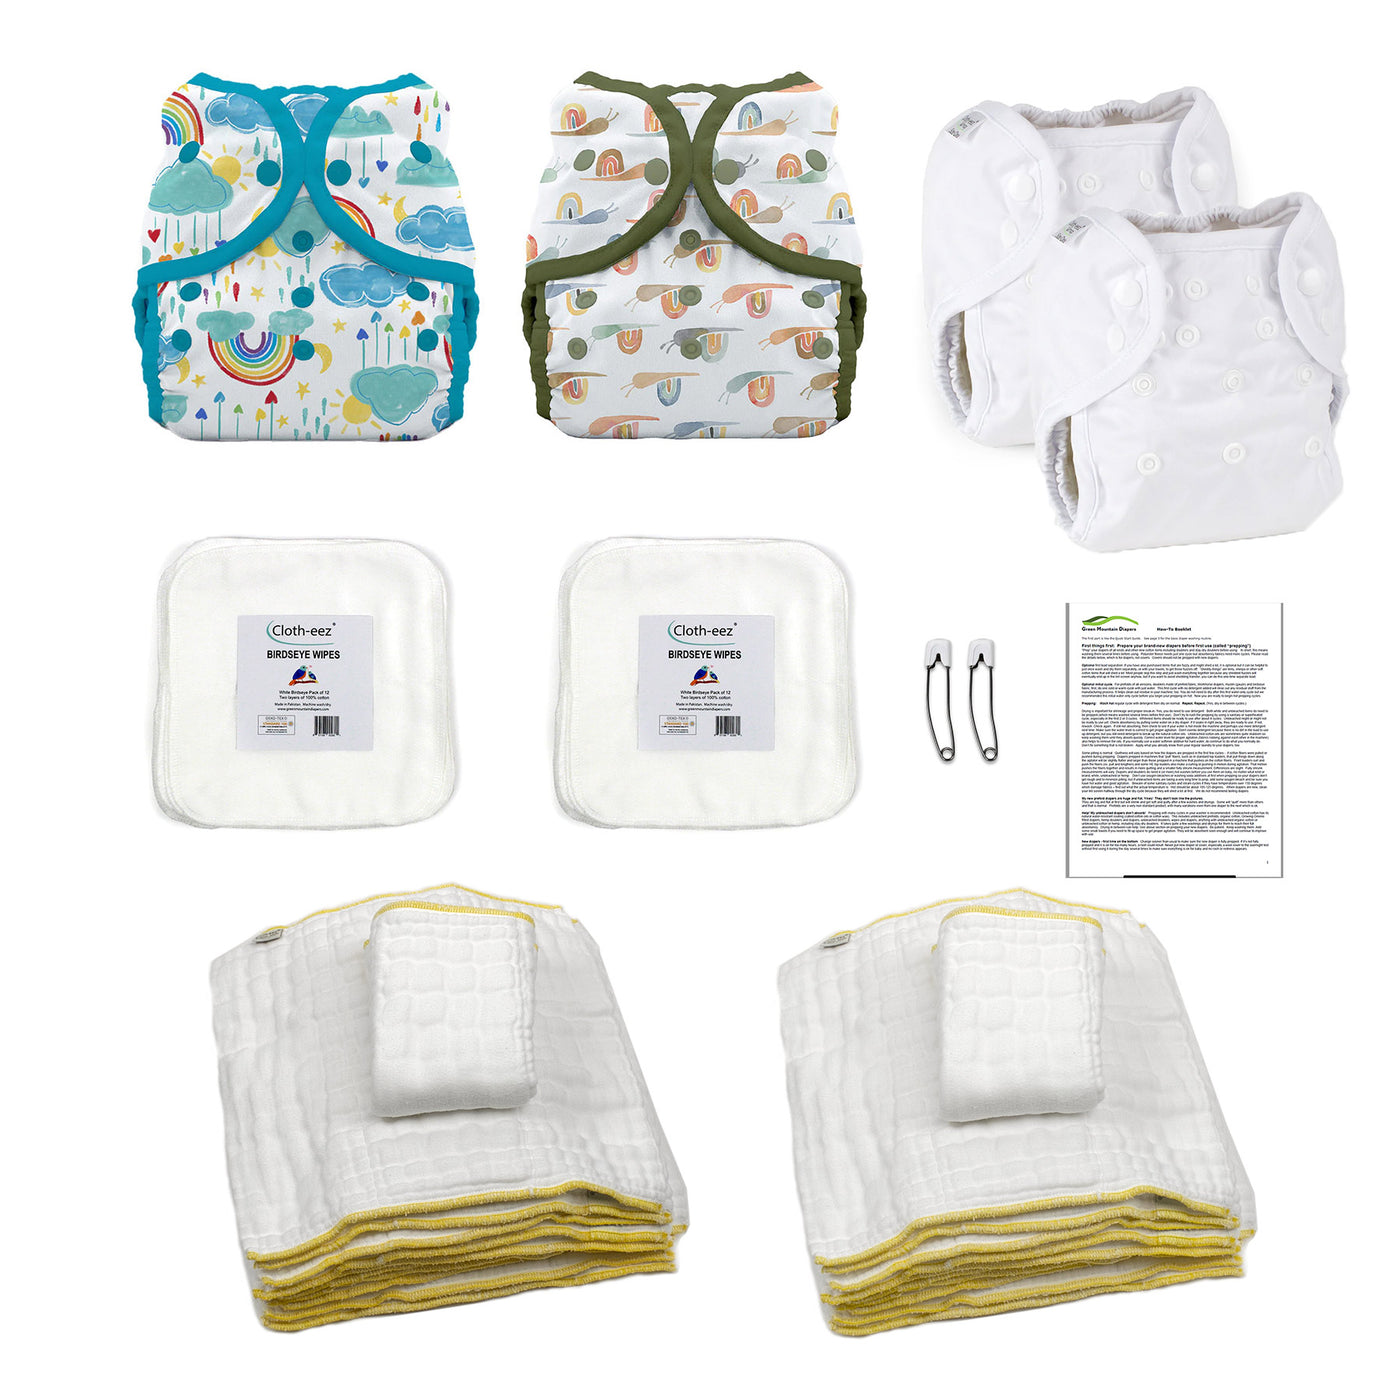 small cloth diaper kit for a big newborn baby with rainbows